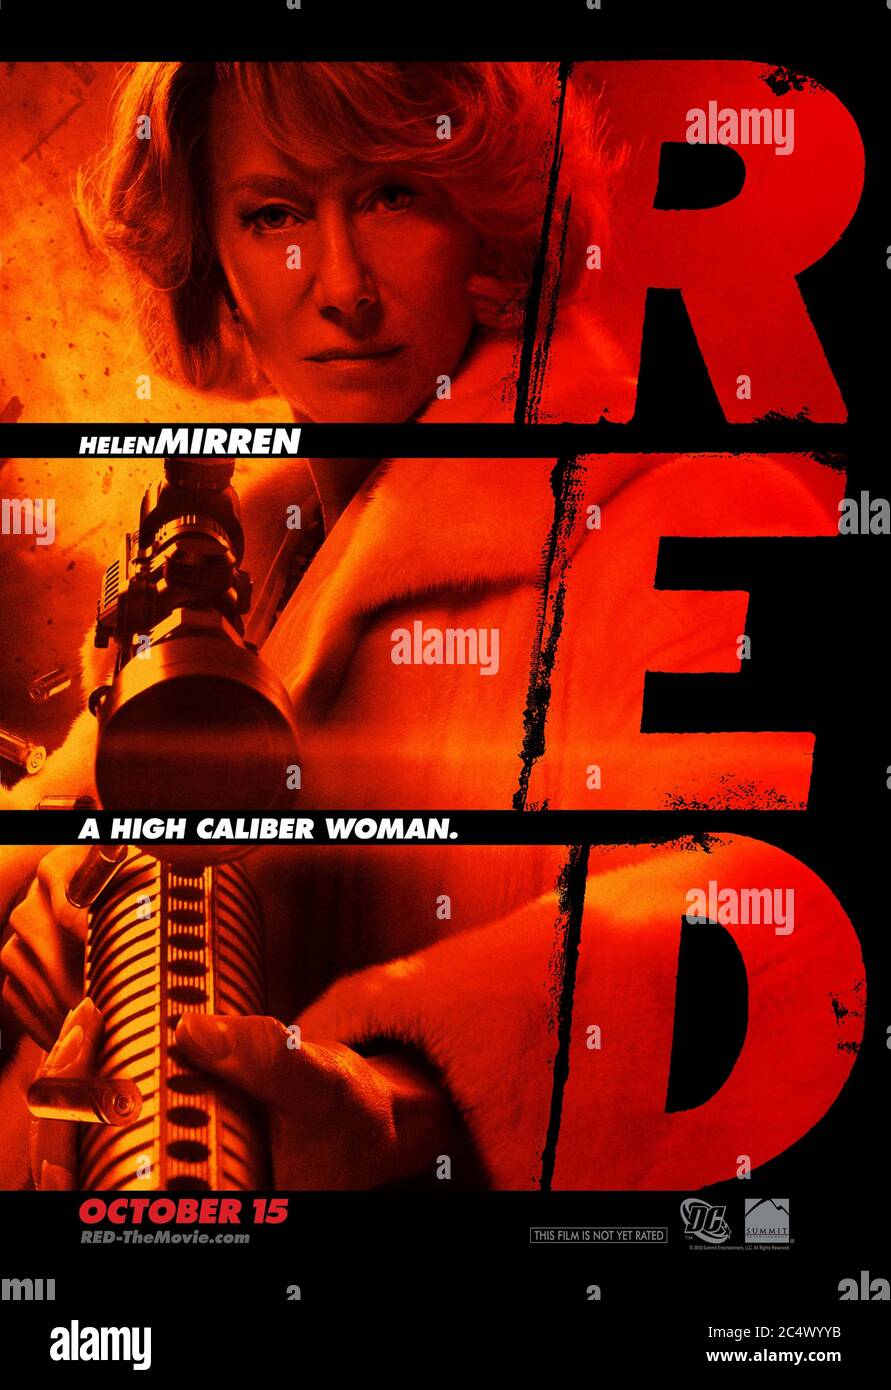 RED (2010) directed by Robert Schwentke and starring Helen Miren as Victoria who is 'R.E.D.' - Retired Extremely Dangerous, based on the DC Comic book. Stock Photo